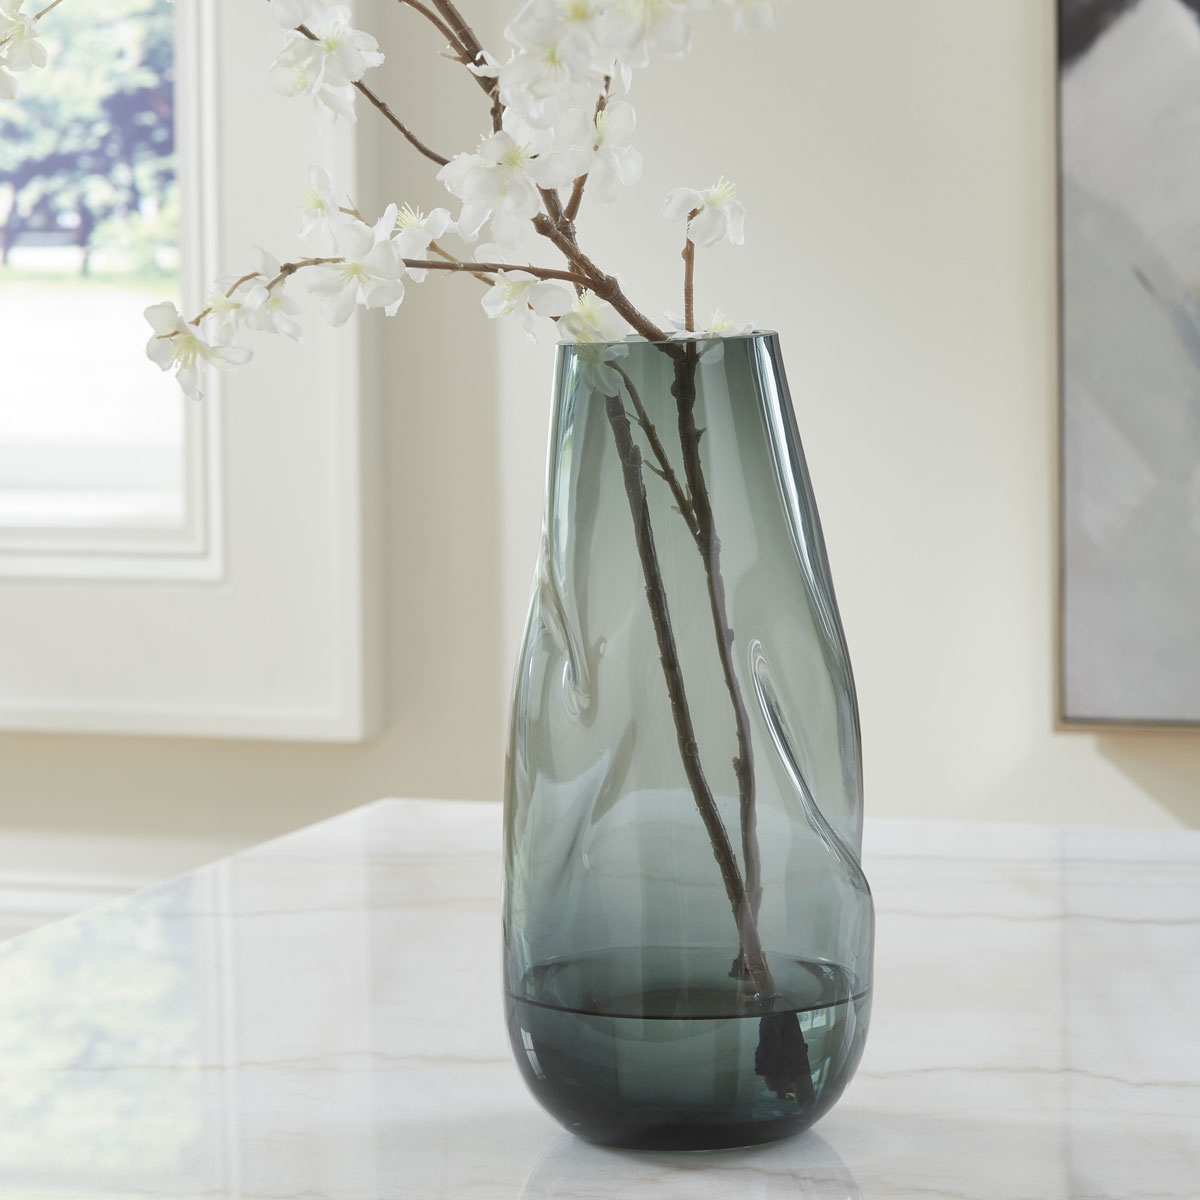 Picture of BEAMUND LG TEAL GLASS VASE